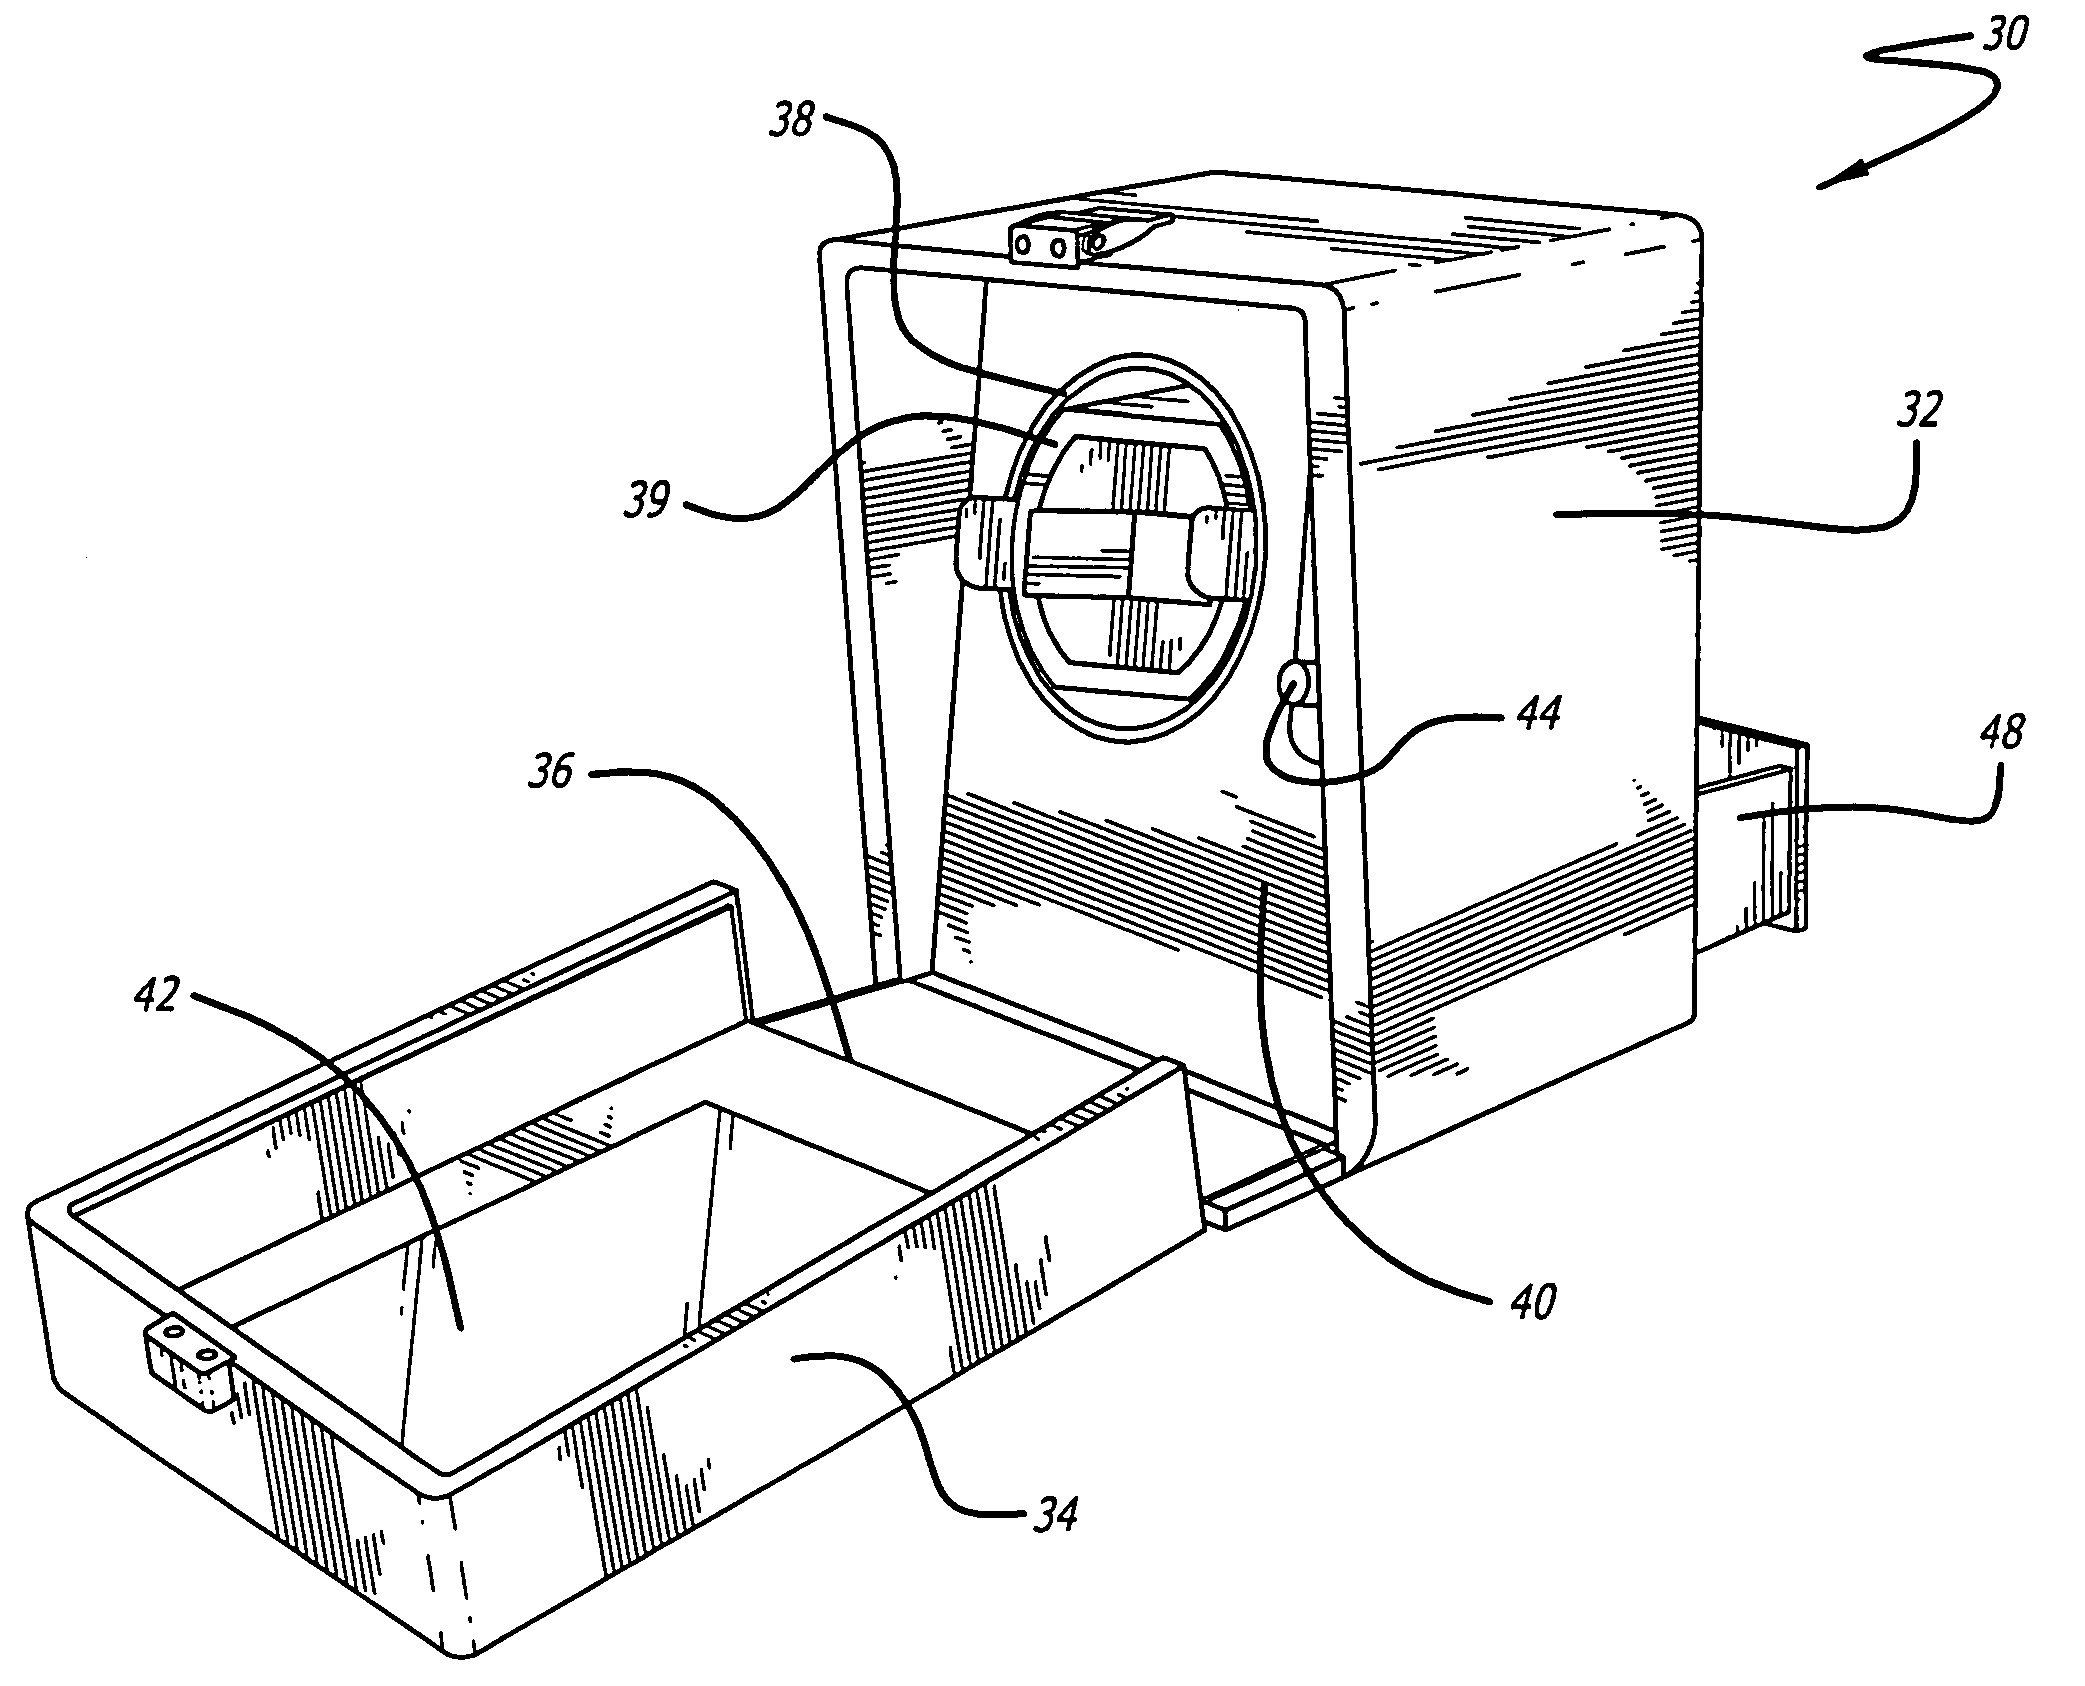 Controllable watch winder for self-winding watches